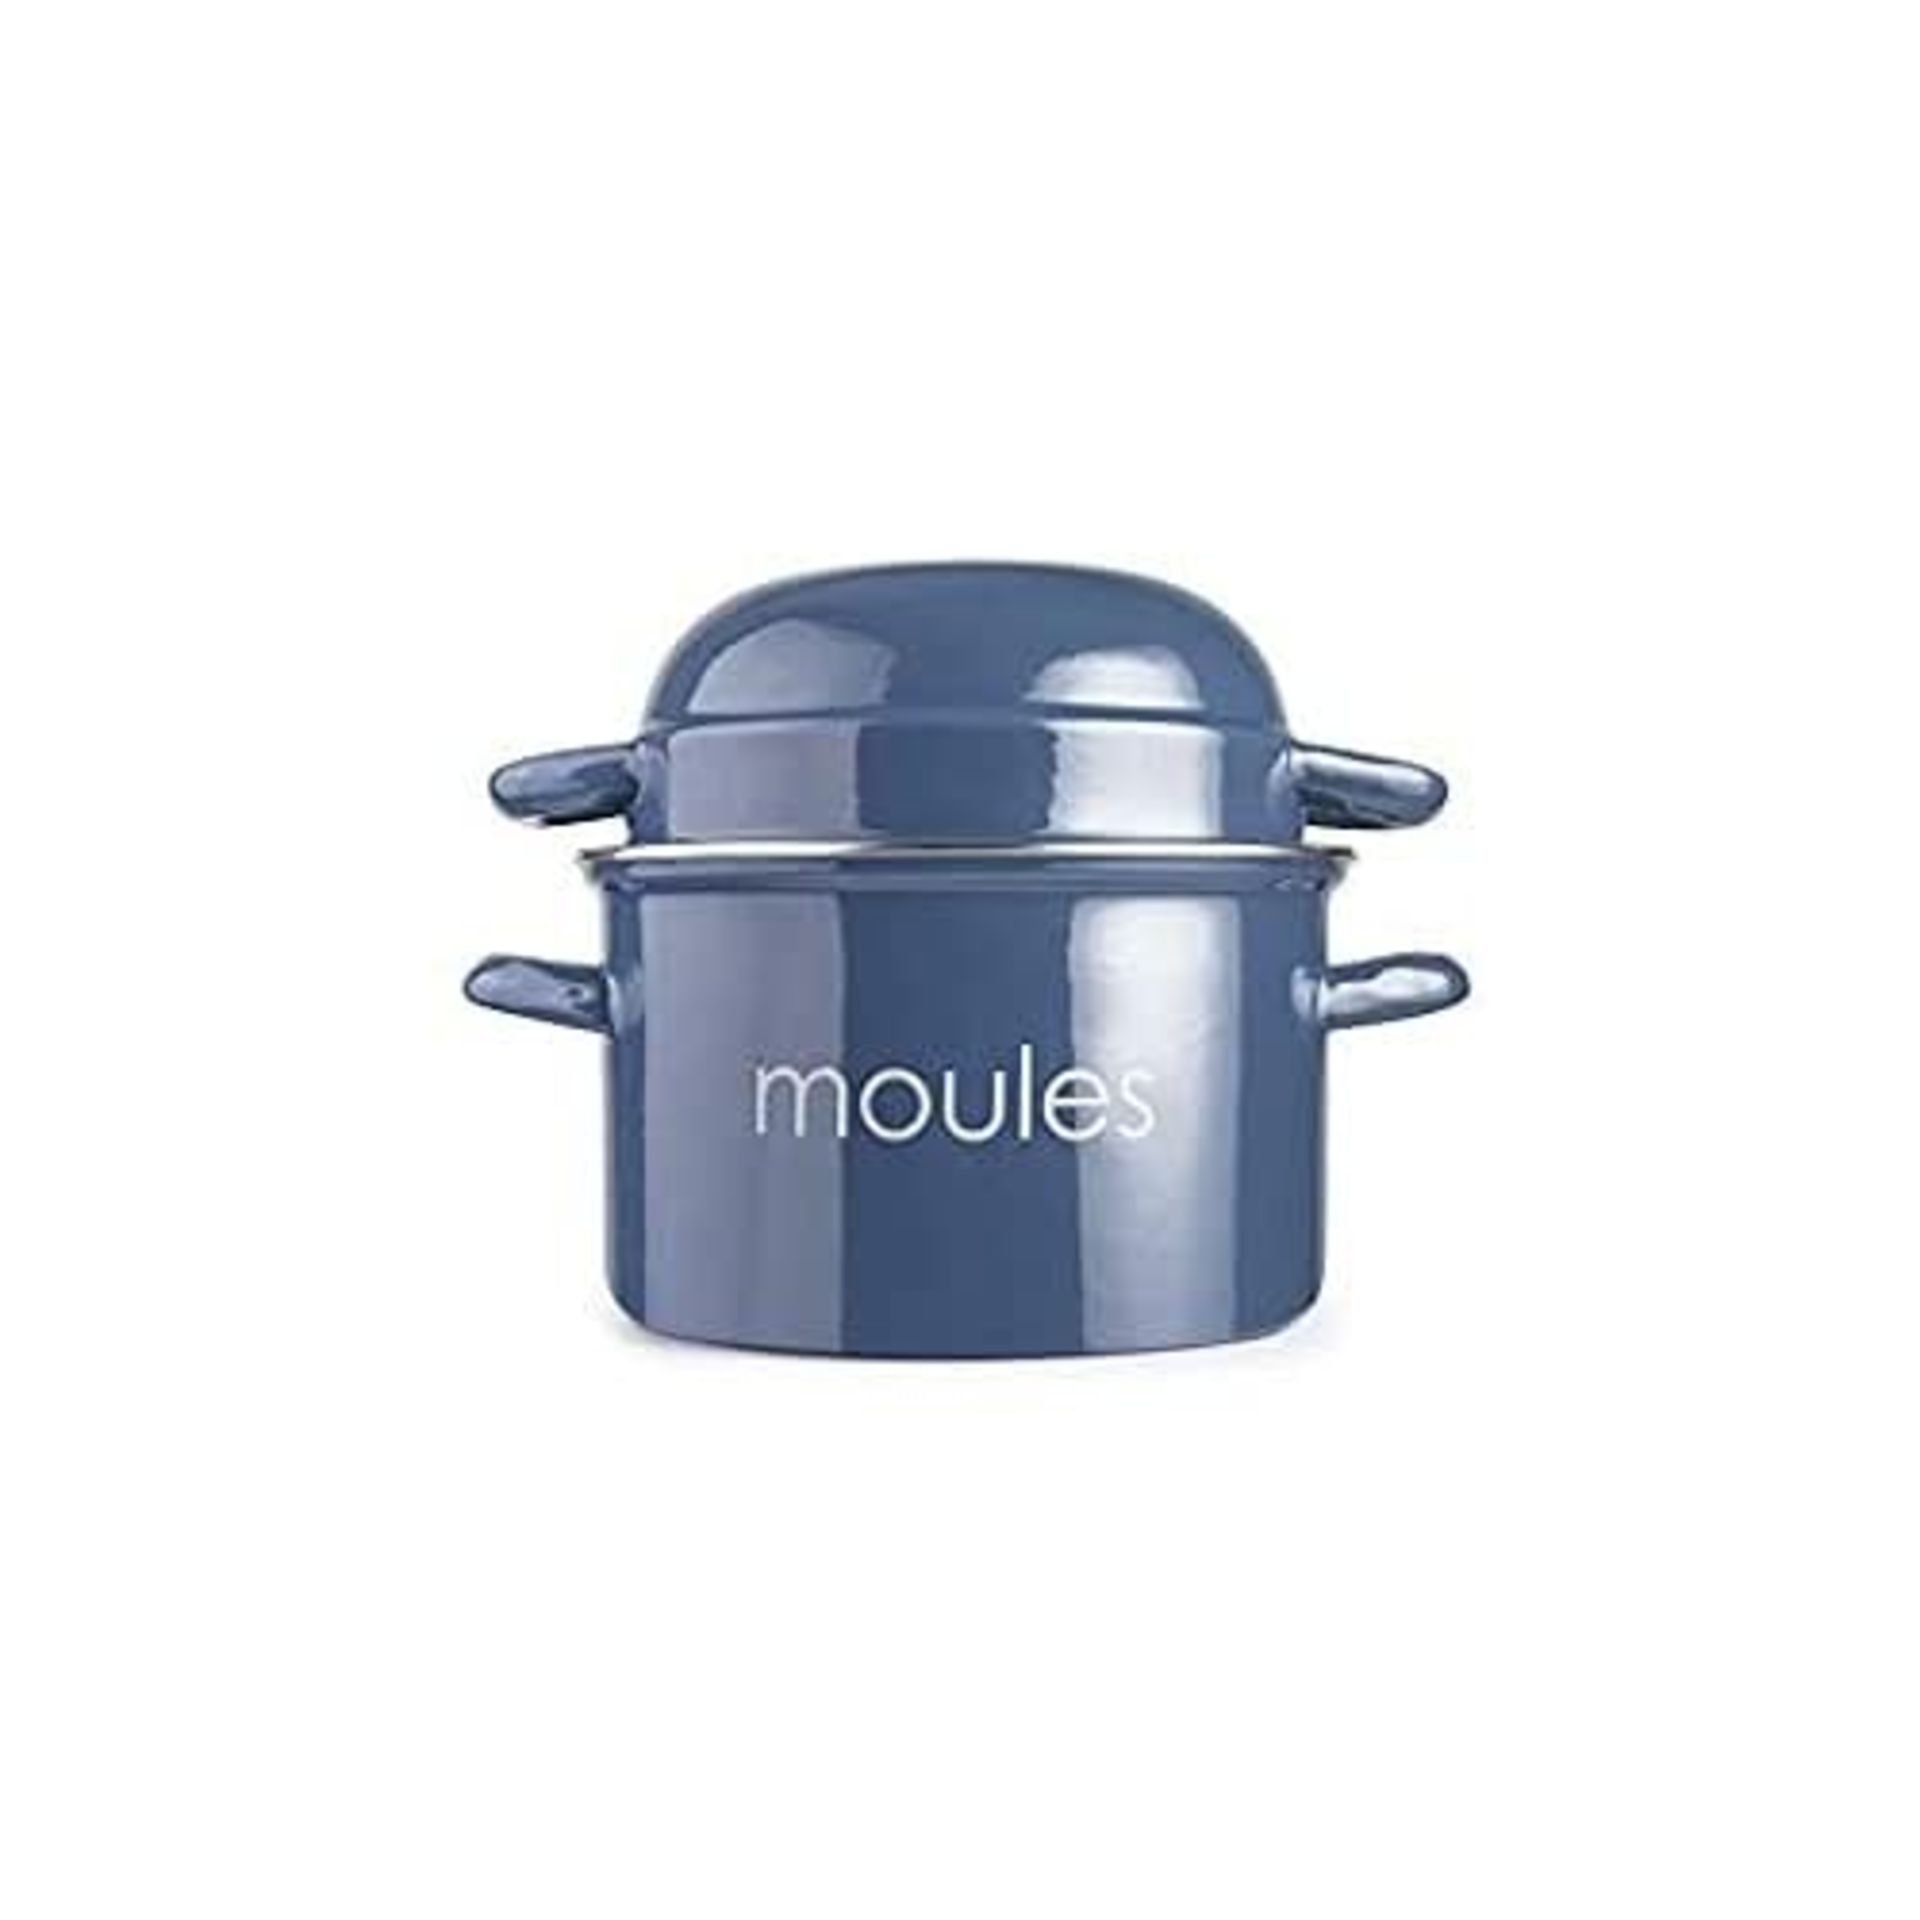 IBILI Mussels Pot, Petrol, 18 cm, Enamelled Steel, Suitable for Induction Hobs